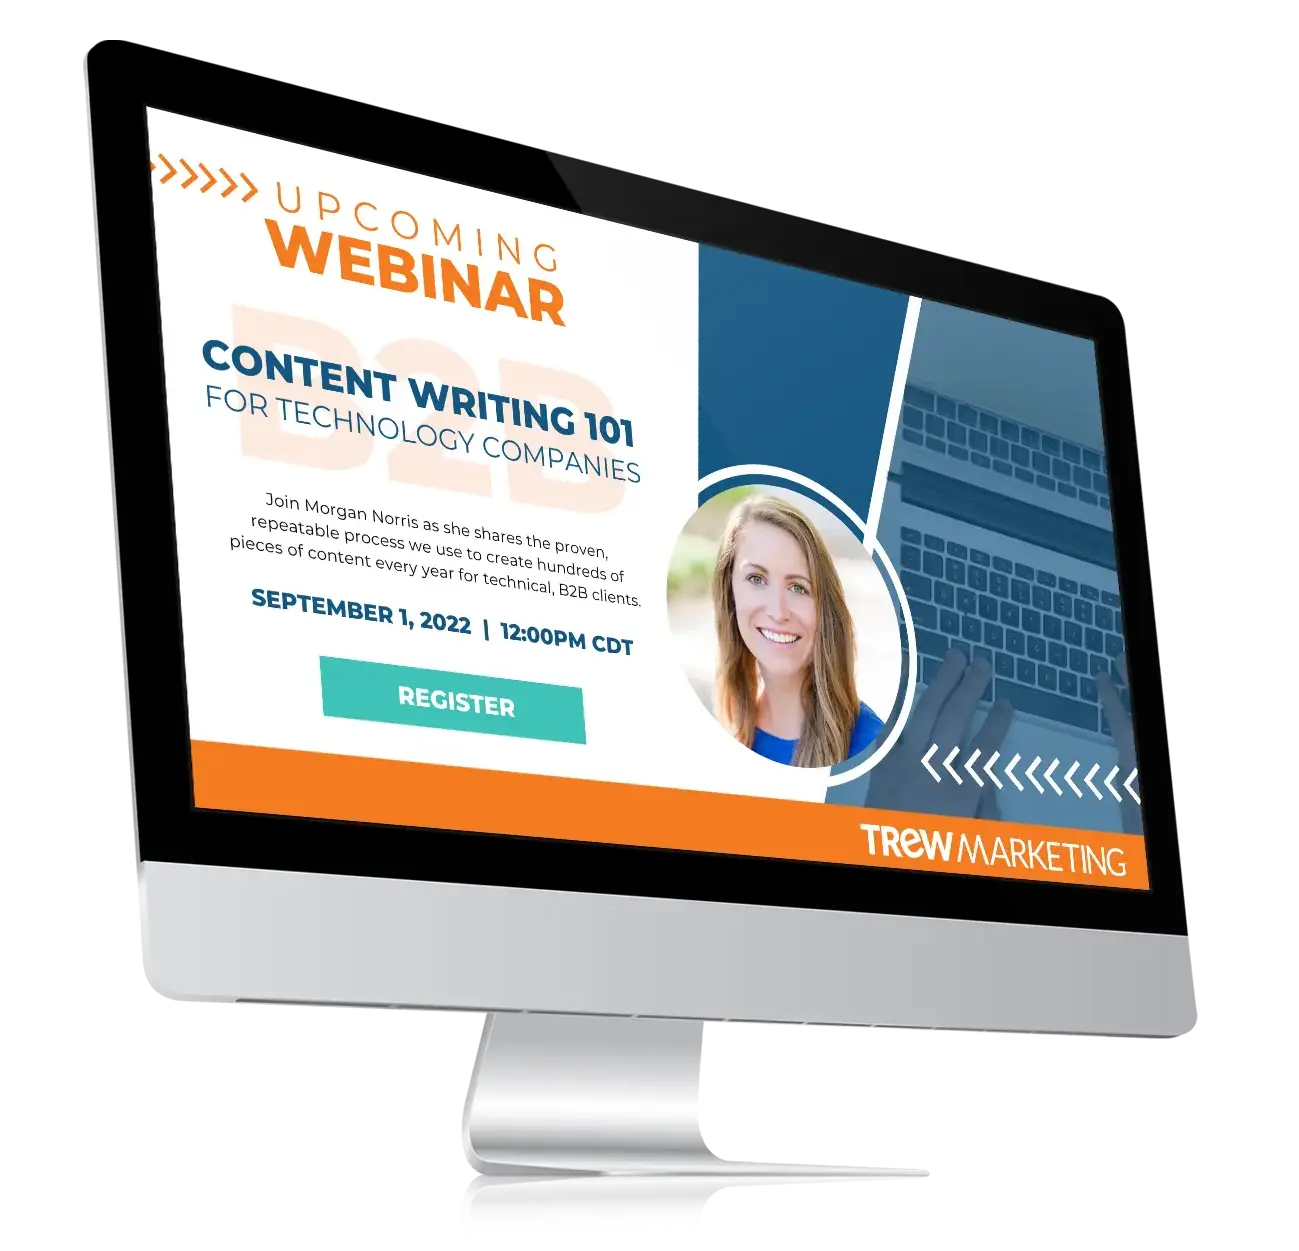 Webinar Feature Image_B2B Content Writing 101 for Technology Companies